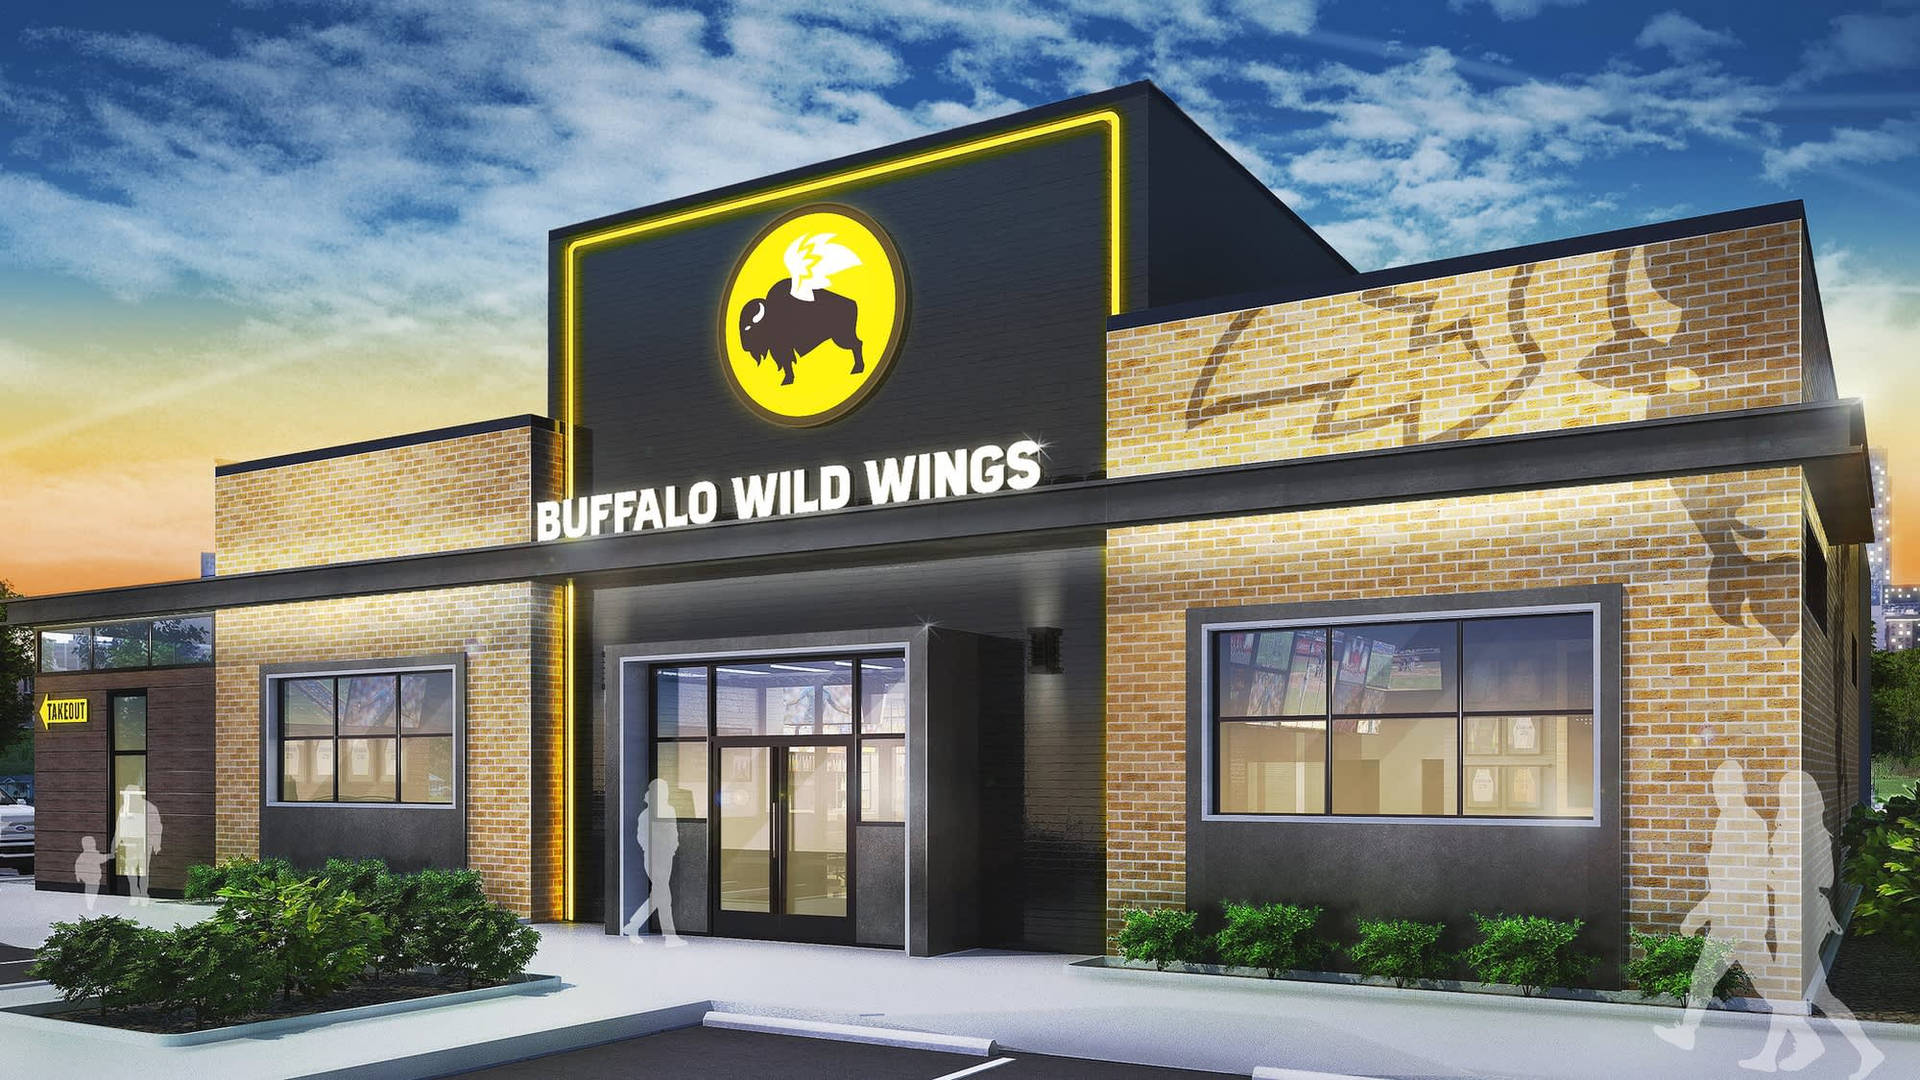 Buffalo Wild Wings Restaurant Architectural Design Background